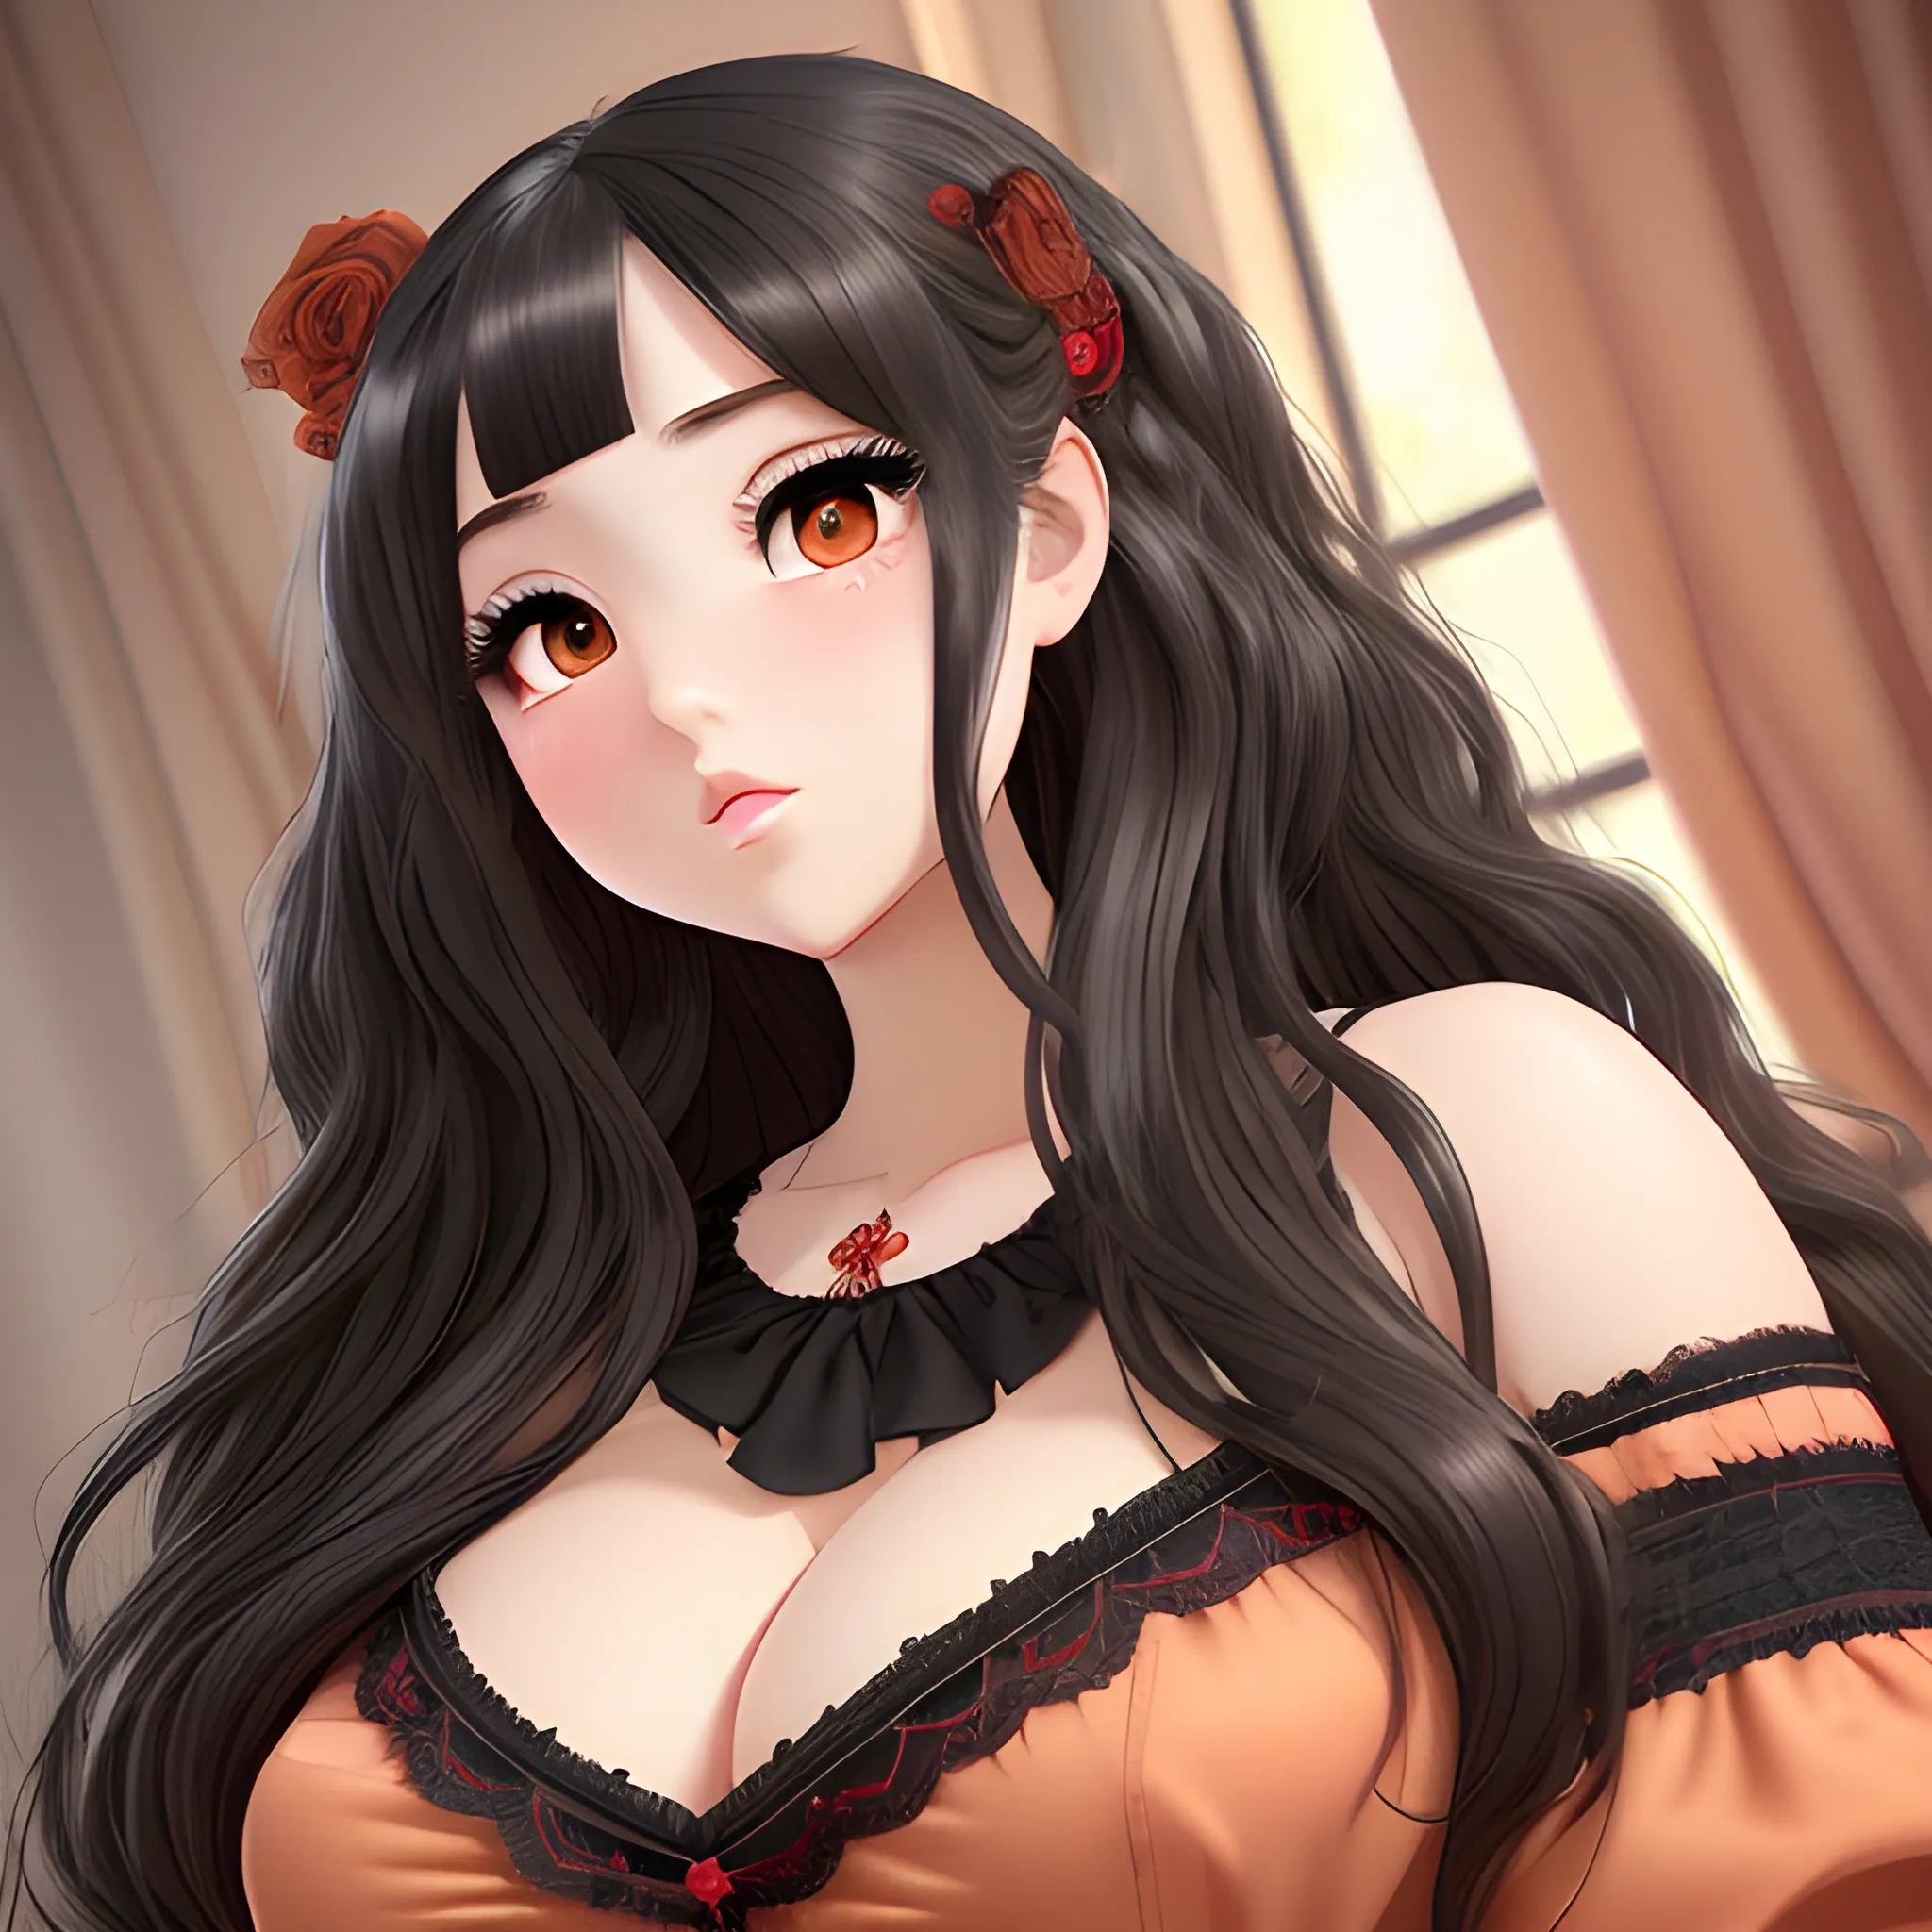 (((high detail))), best quality, Warm Colors, (detailed), (high resolution)Black long-haired female adult, full body, curvy face, with rosy cheeks, big black eyes, thick eyelashes, thick peach lips, thick eyebrows,  with a black and red dress  saying i want the harem